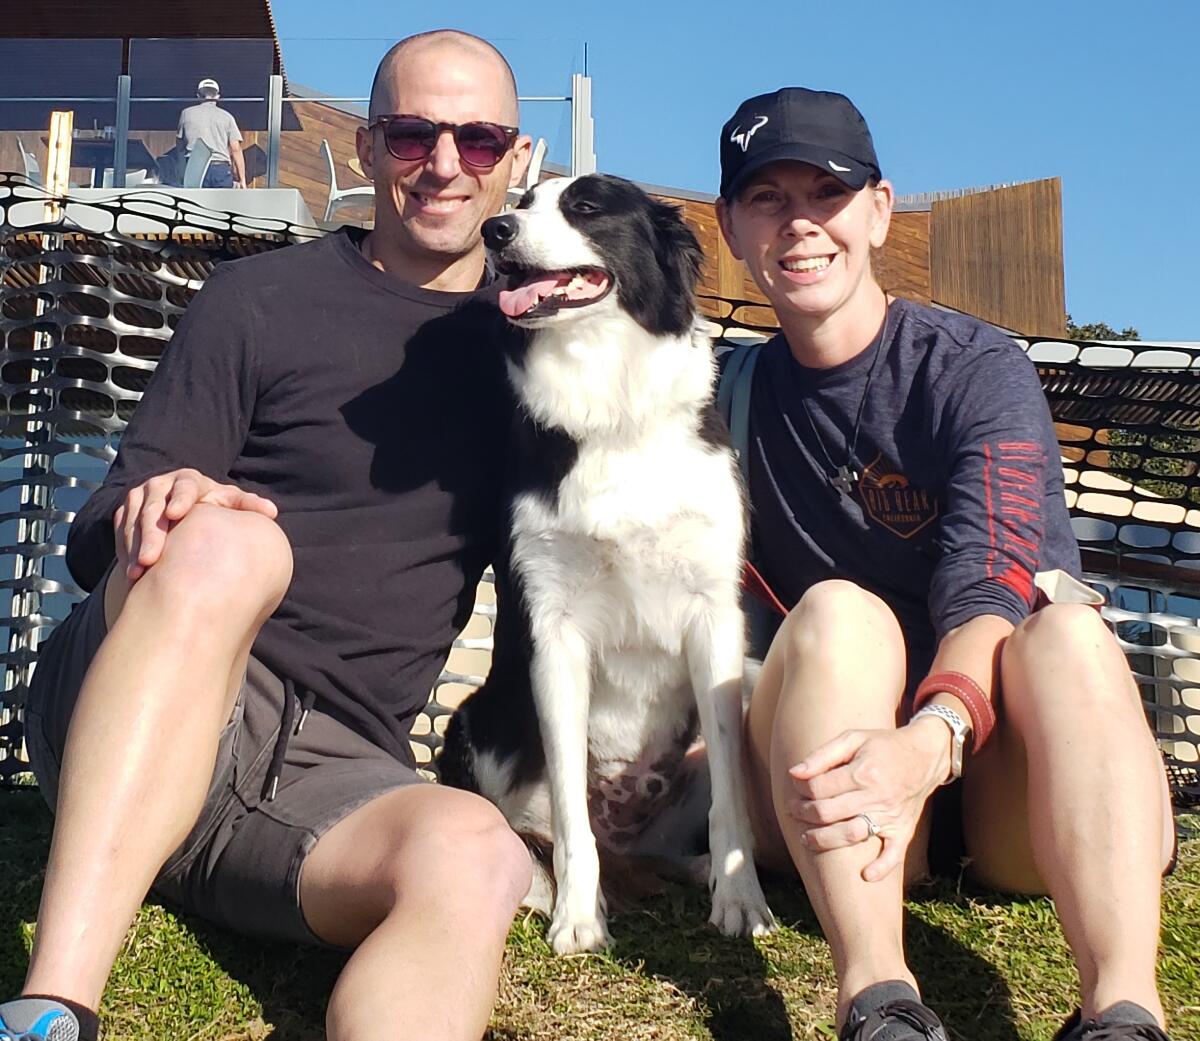 Scott and Erica Thomas relax with their border collie, Bobby, who is the mascot for their Bobby’s Pet Grooming business.